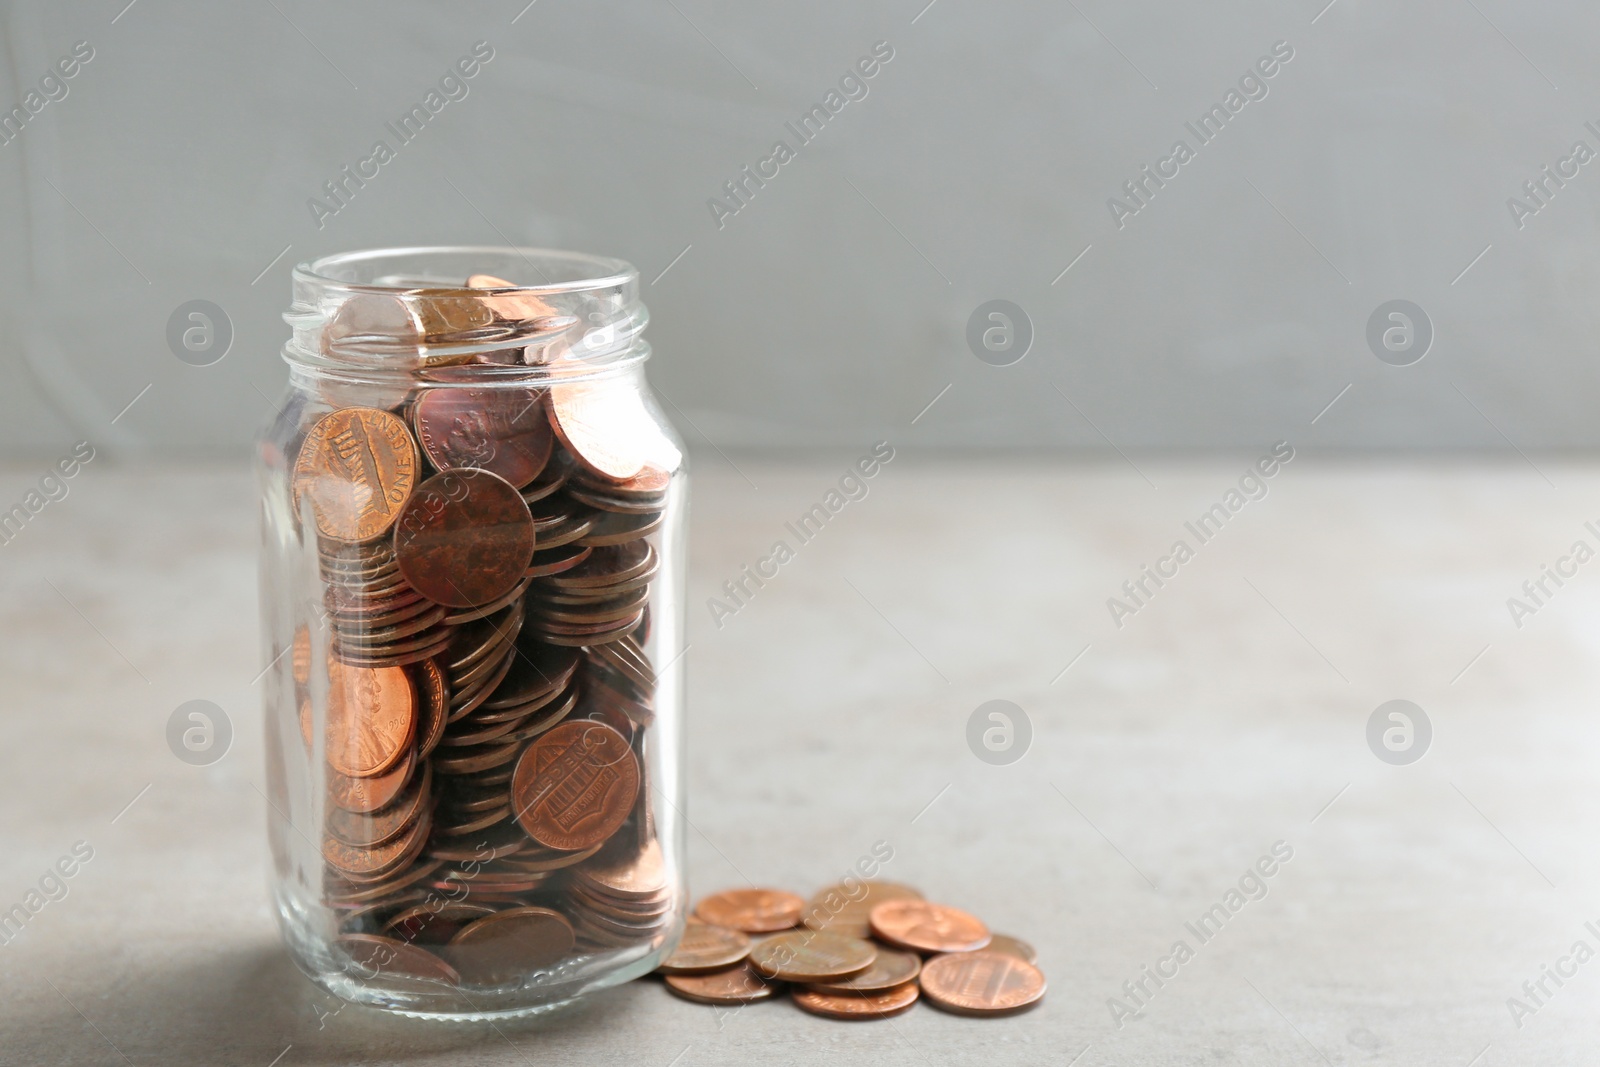 Photo of Glass jar and coins on table against grey background. Space for text